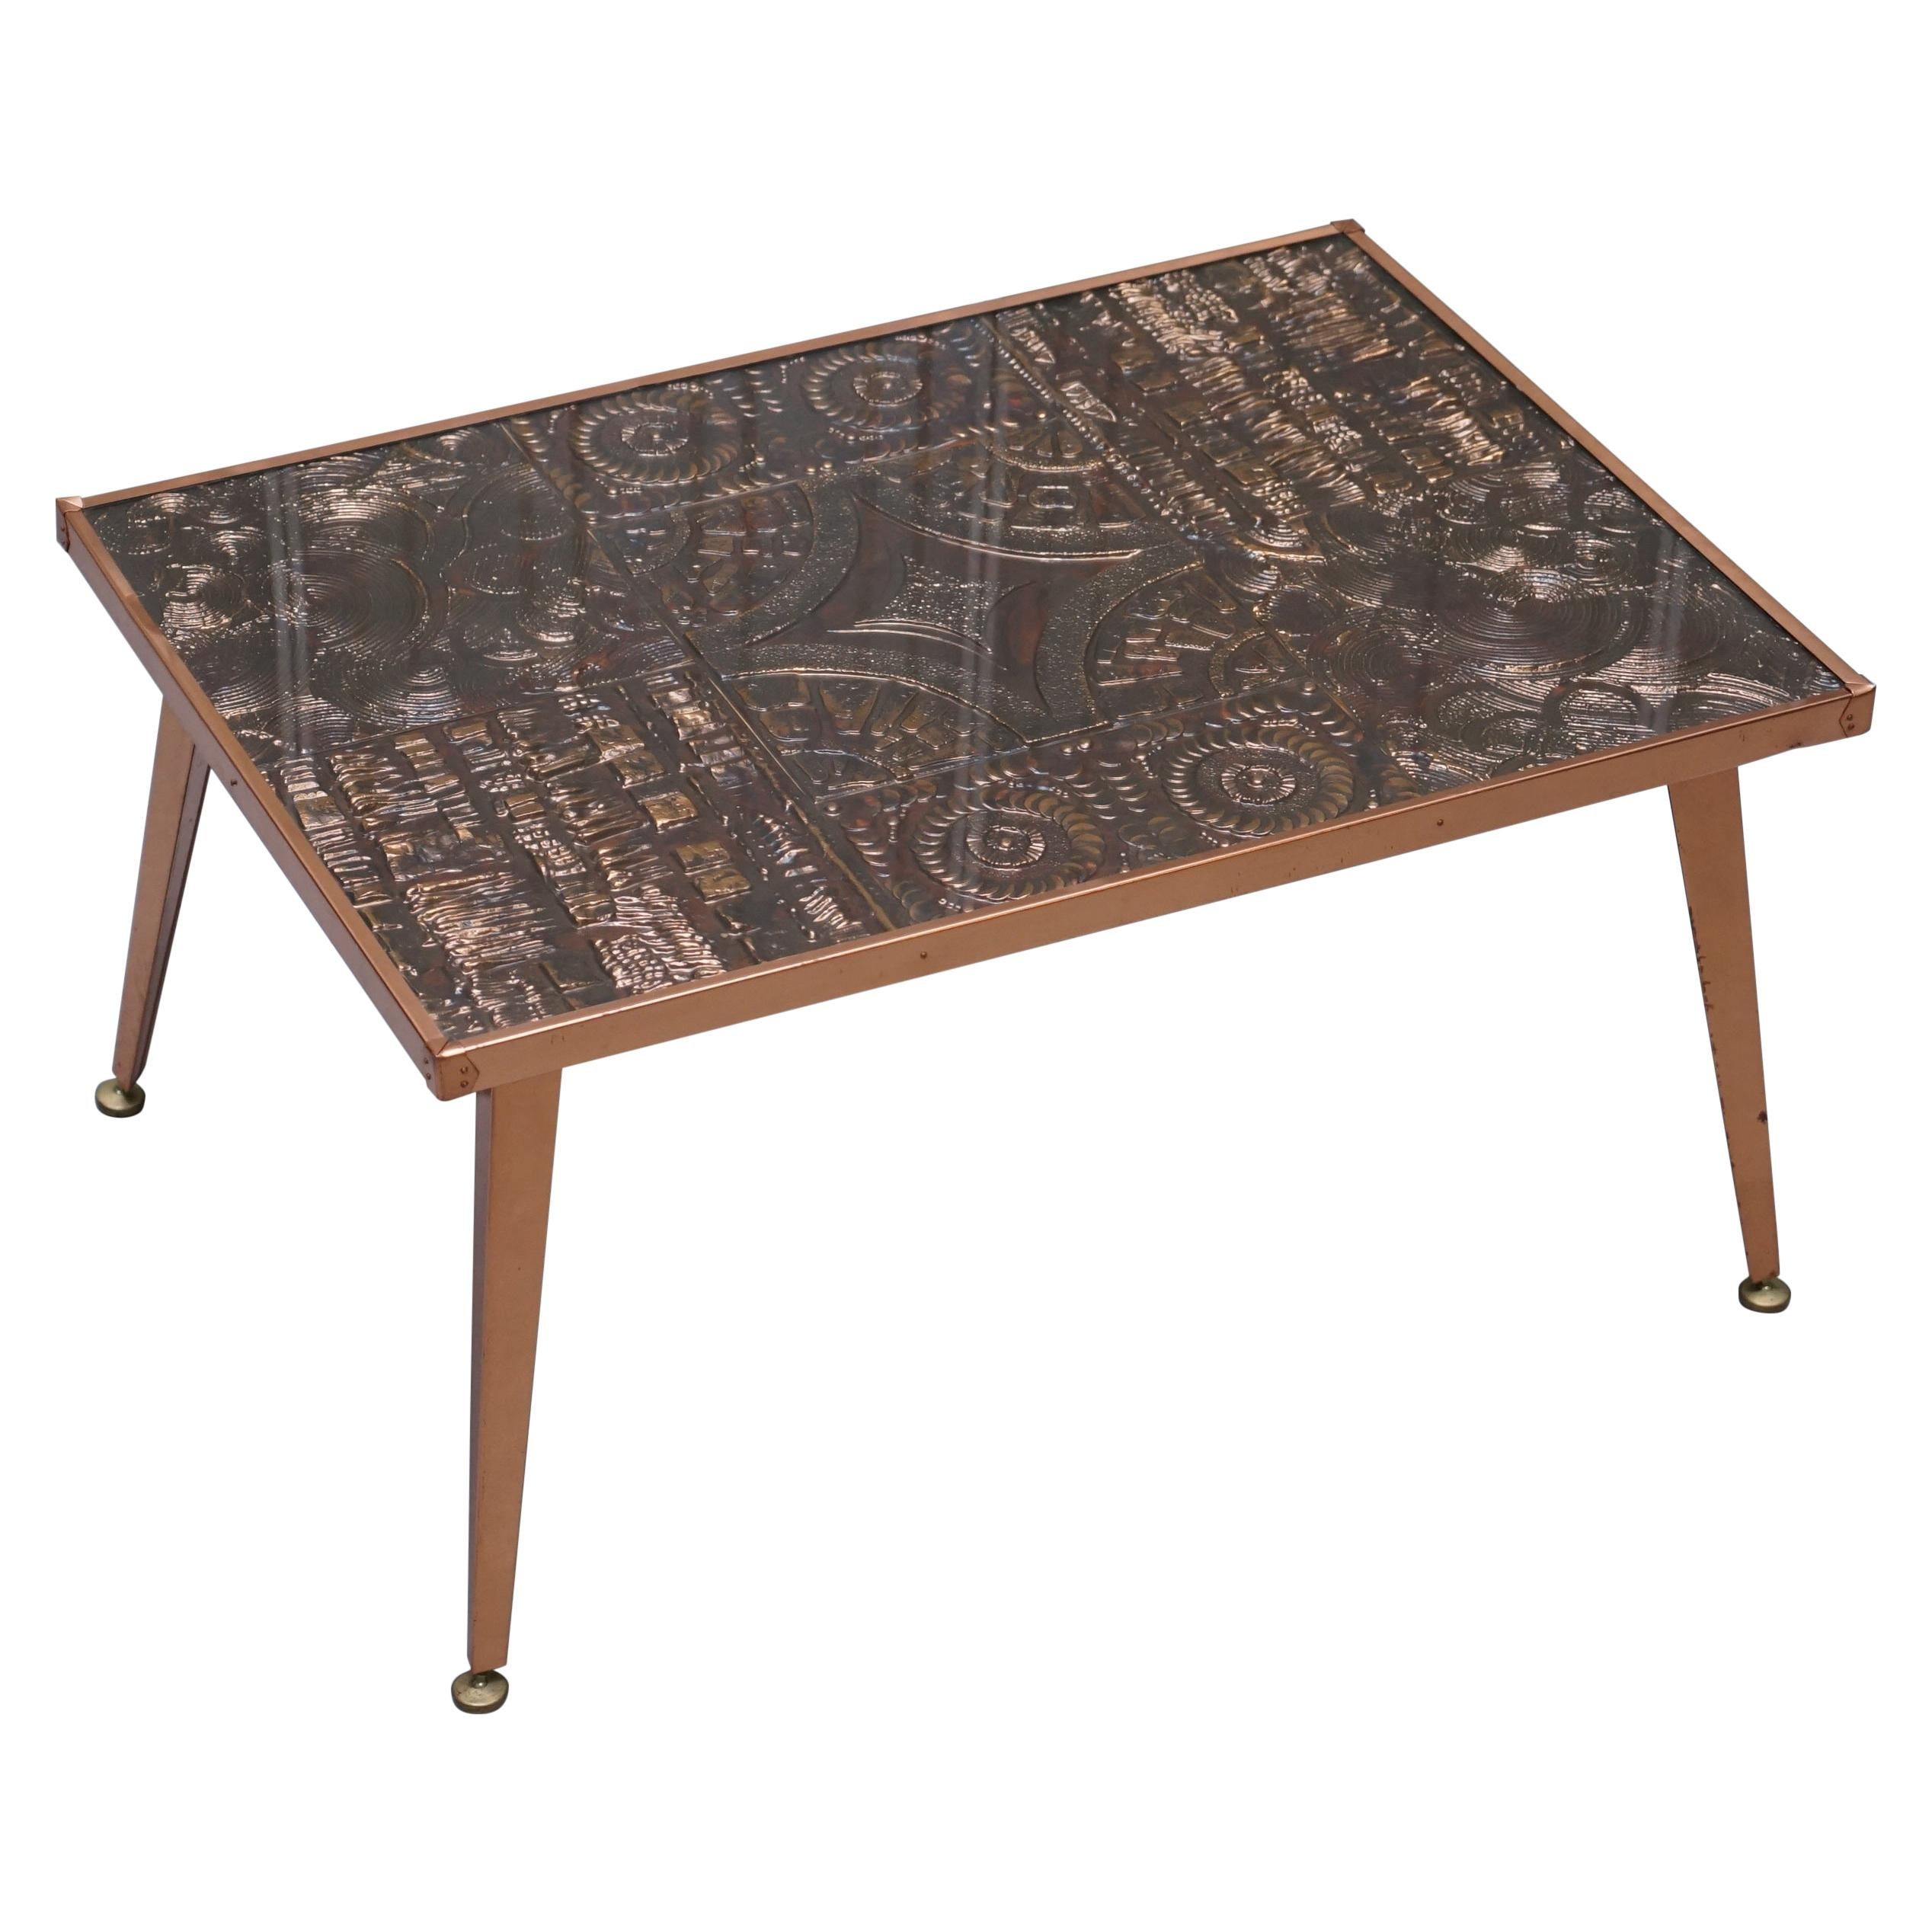 Stunning Zambian Copper Craft Ltd Ornate Coffee or Cocktail Table Seriously Cool